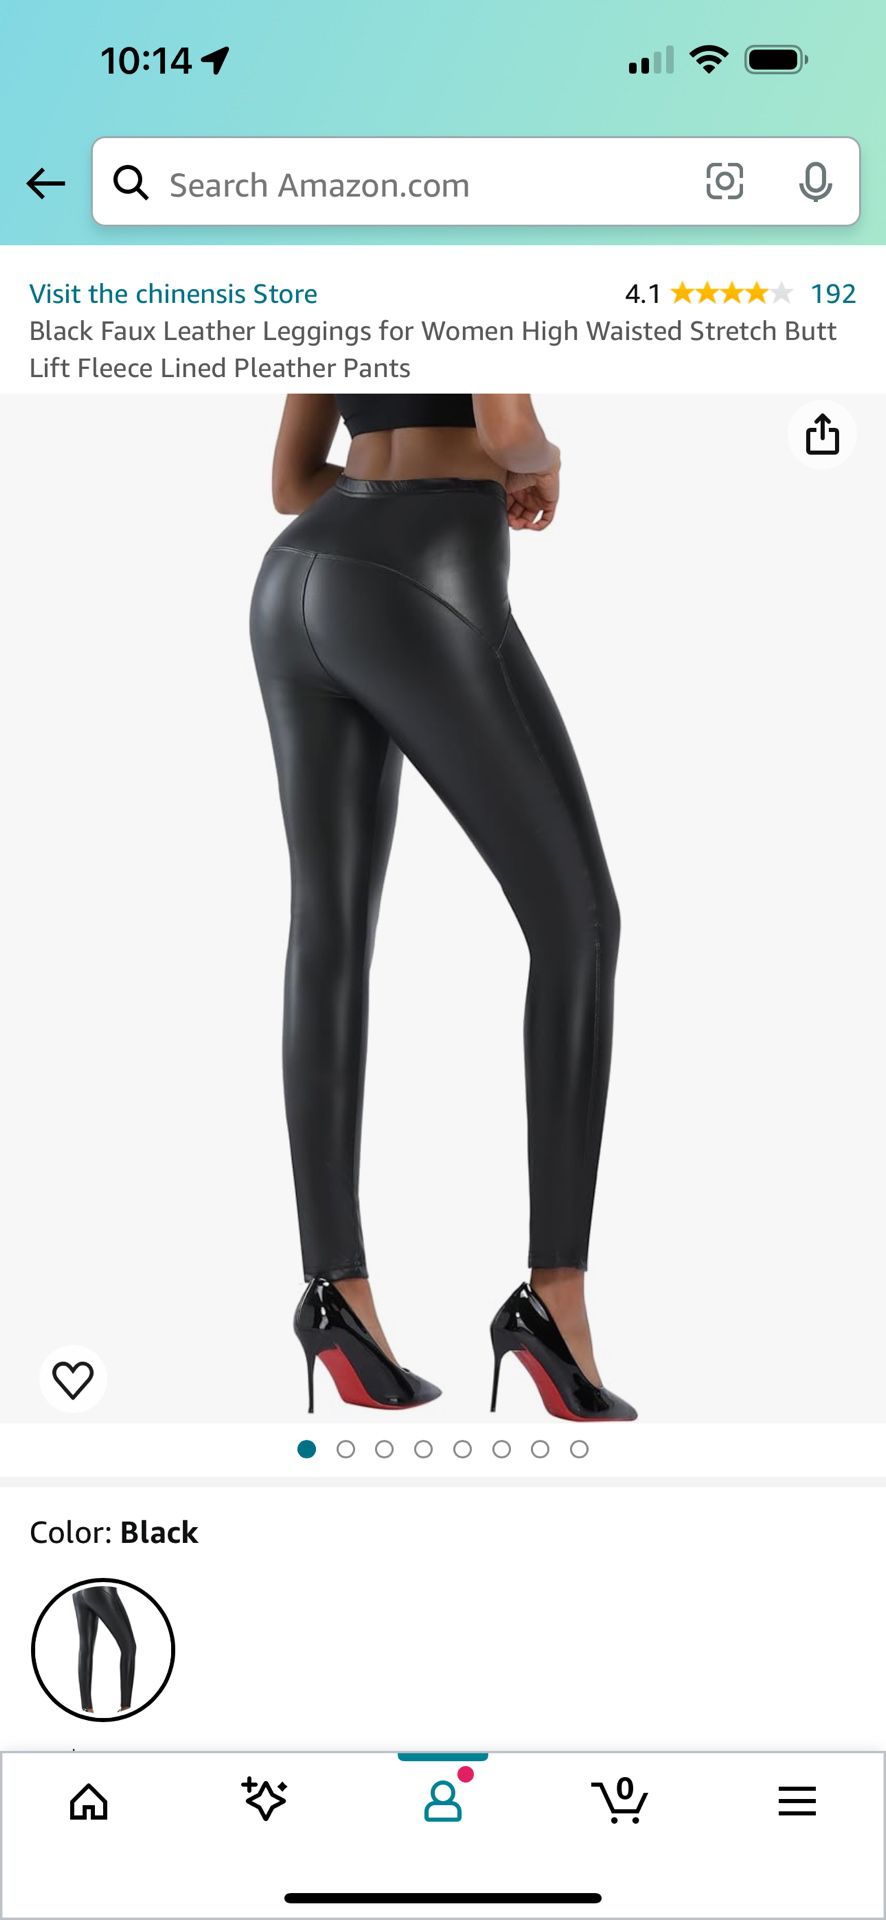 Black Faux Leather Leggings for Women High Waisted Stretch Butt Lift Fleece Lined Pleather Pants